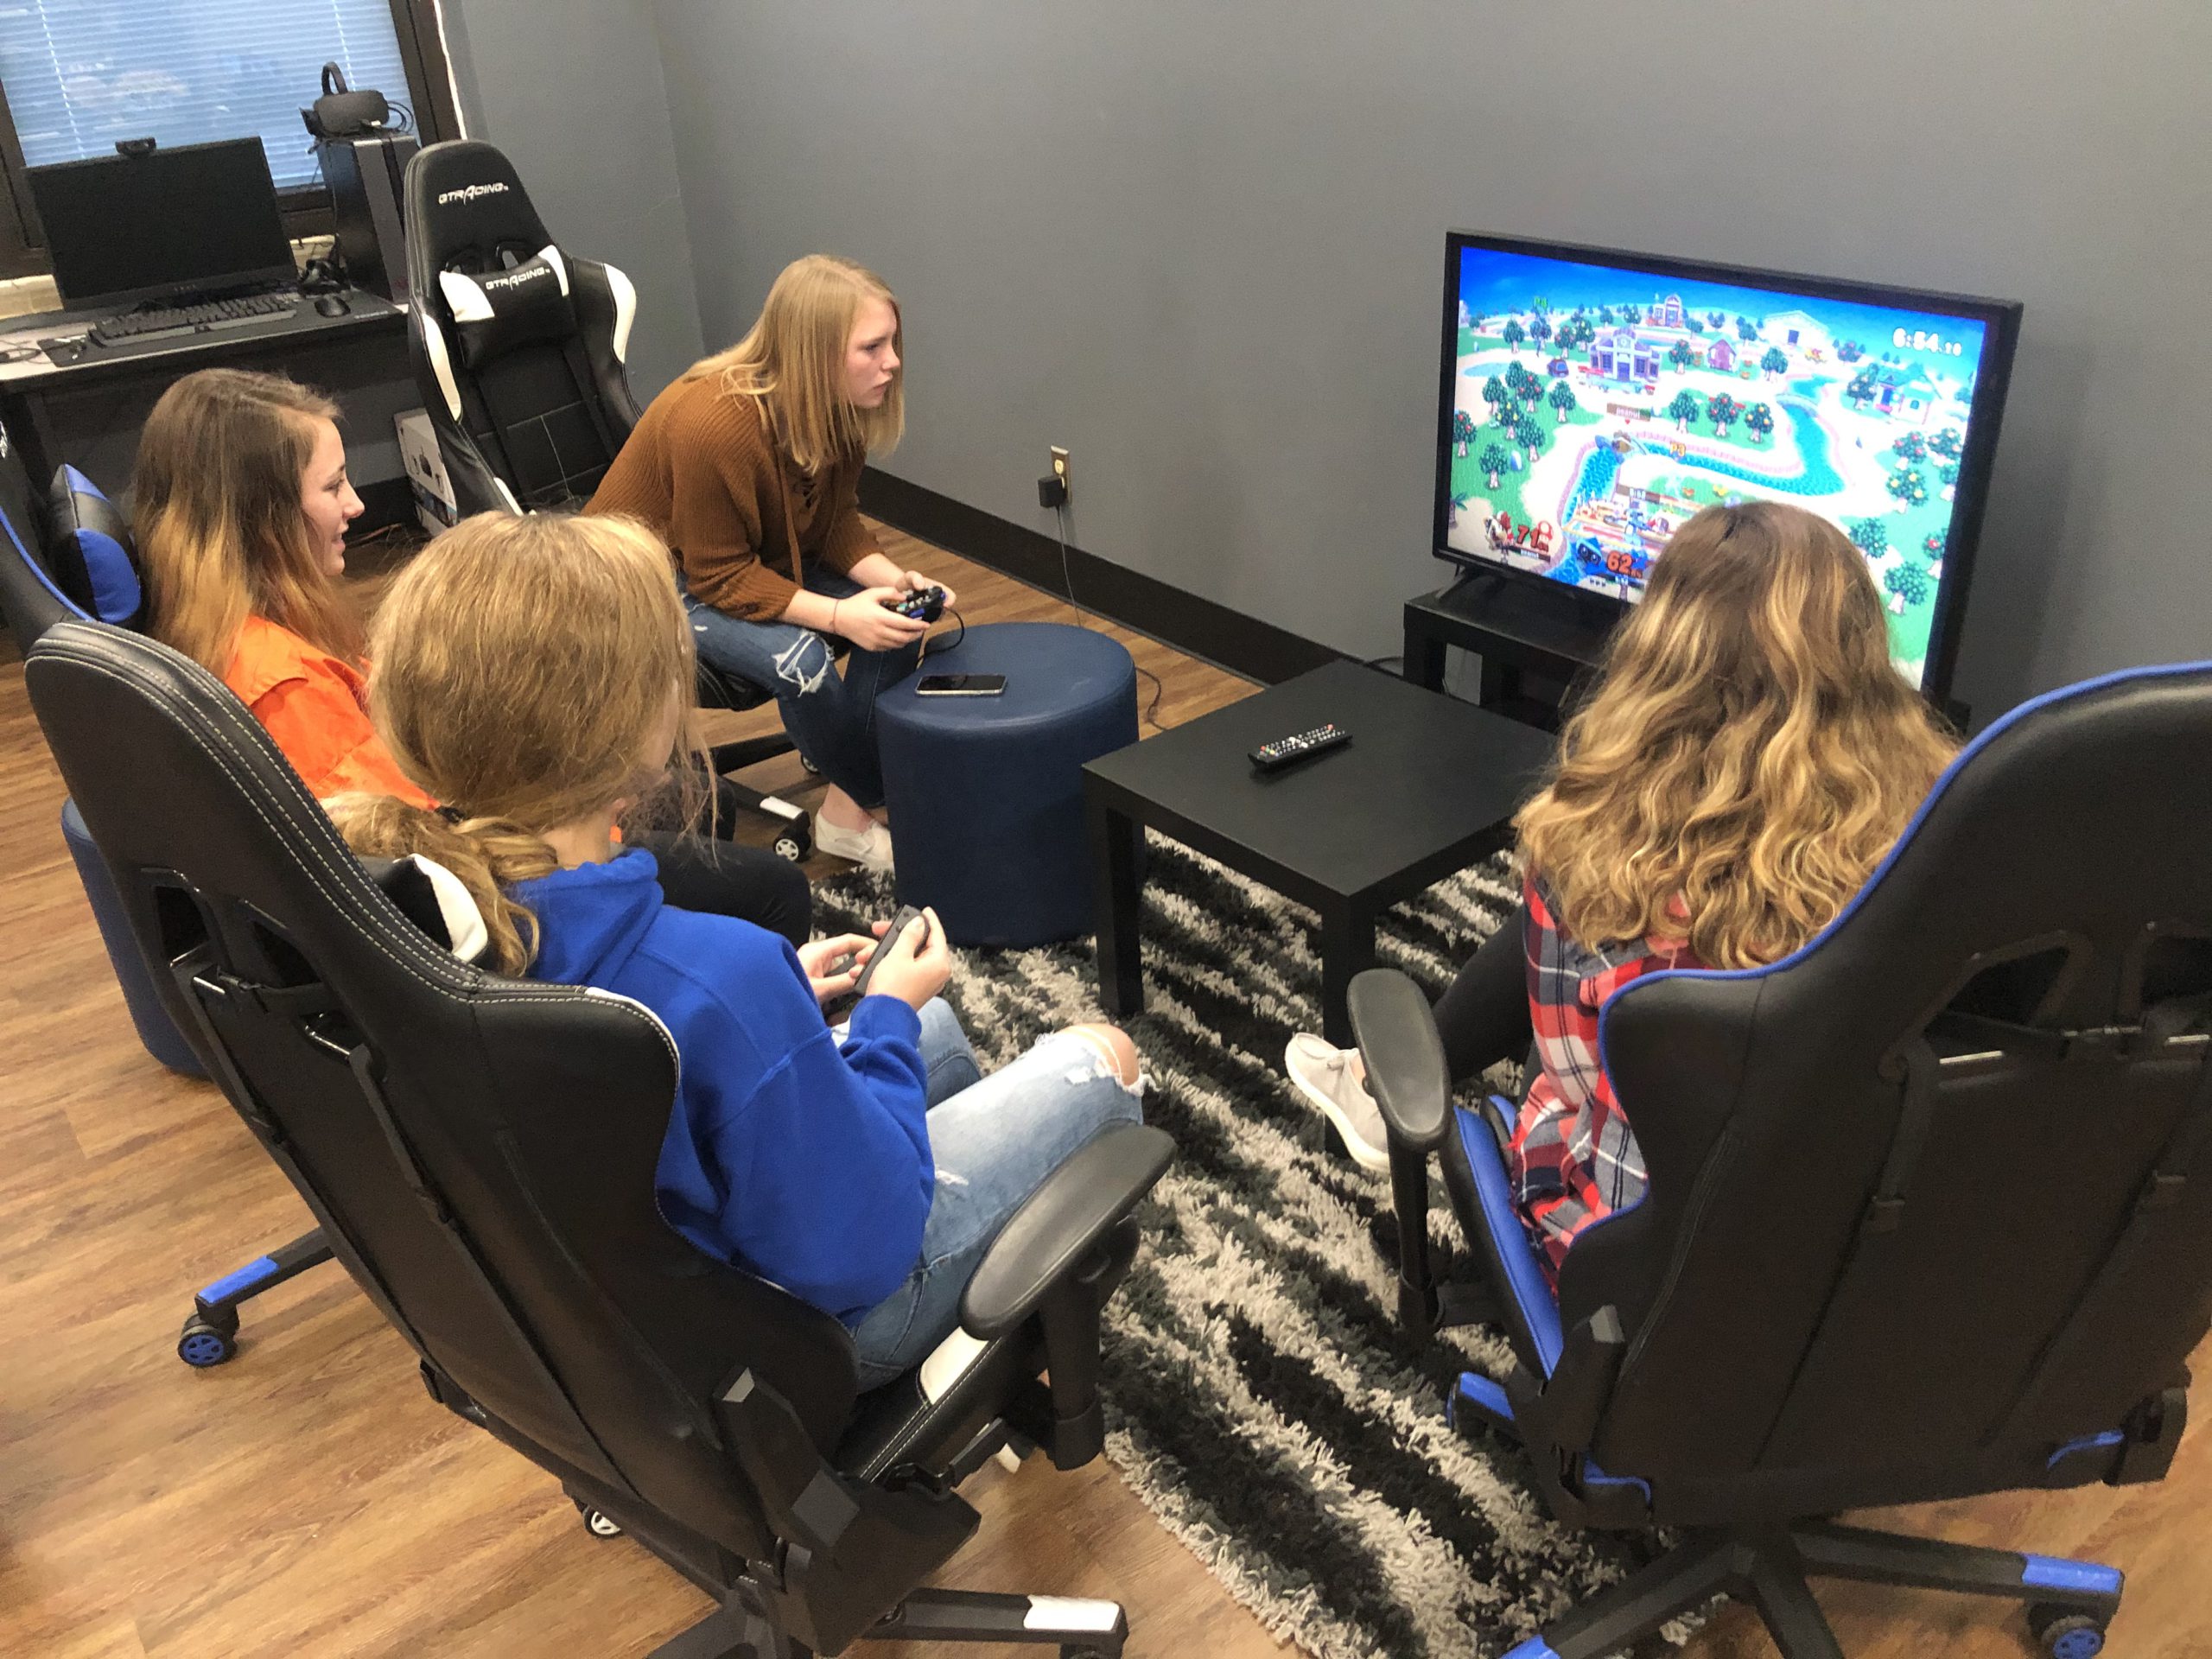 Video games in the classroom, along with an esports curriculum and a competitive team, are teaching students at Tipton High School in Indiana better gaming habits.